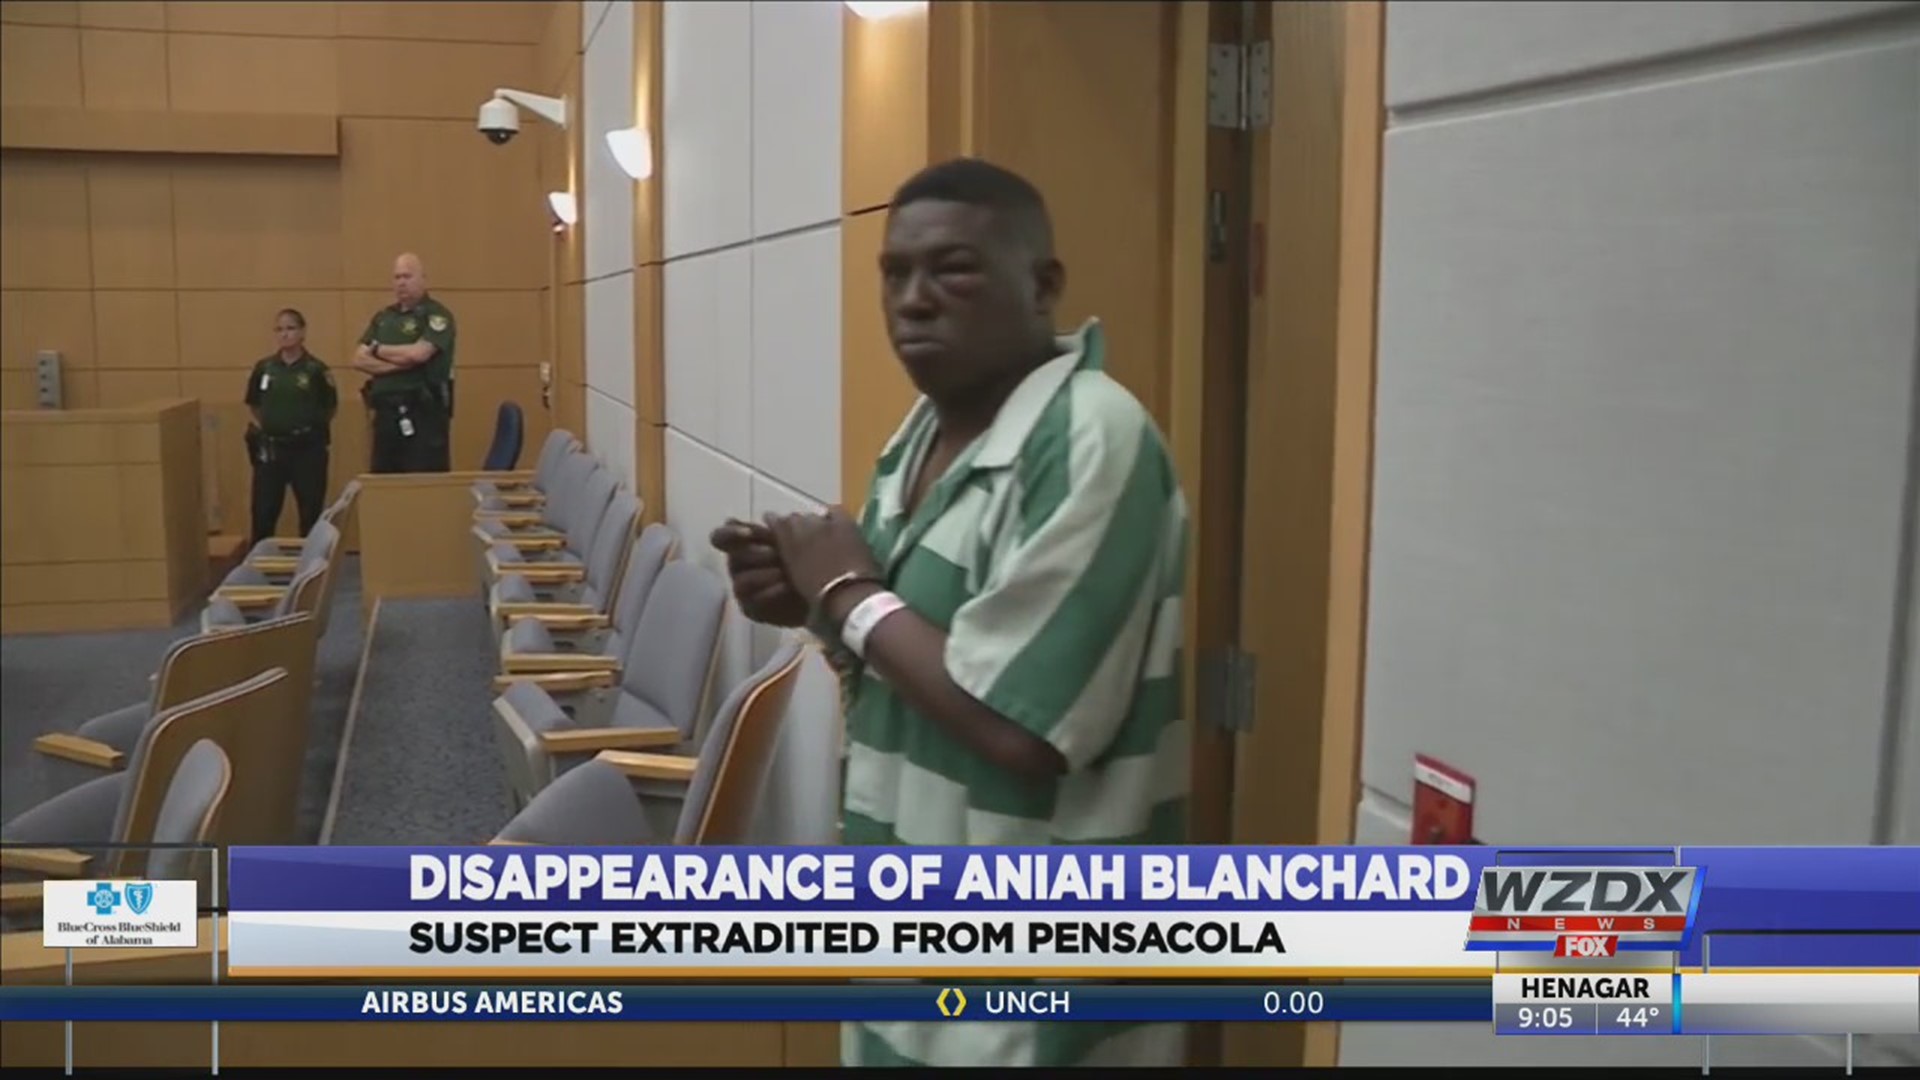 It's been over two weeks since Aniah Blanchard went missing, and the search is continuing.